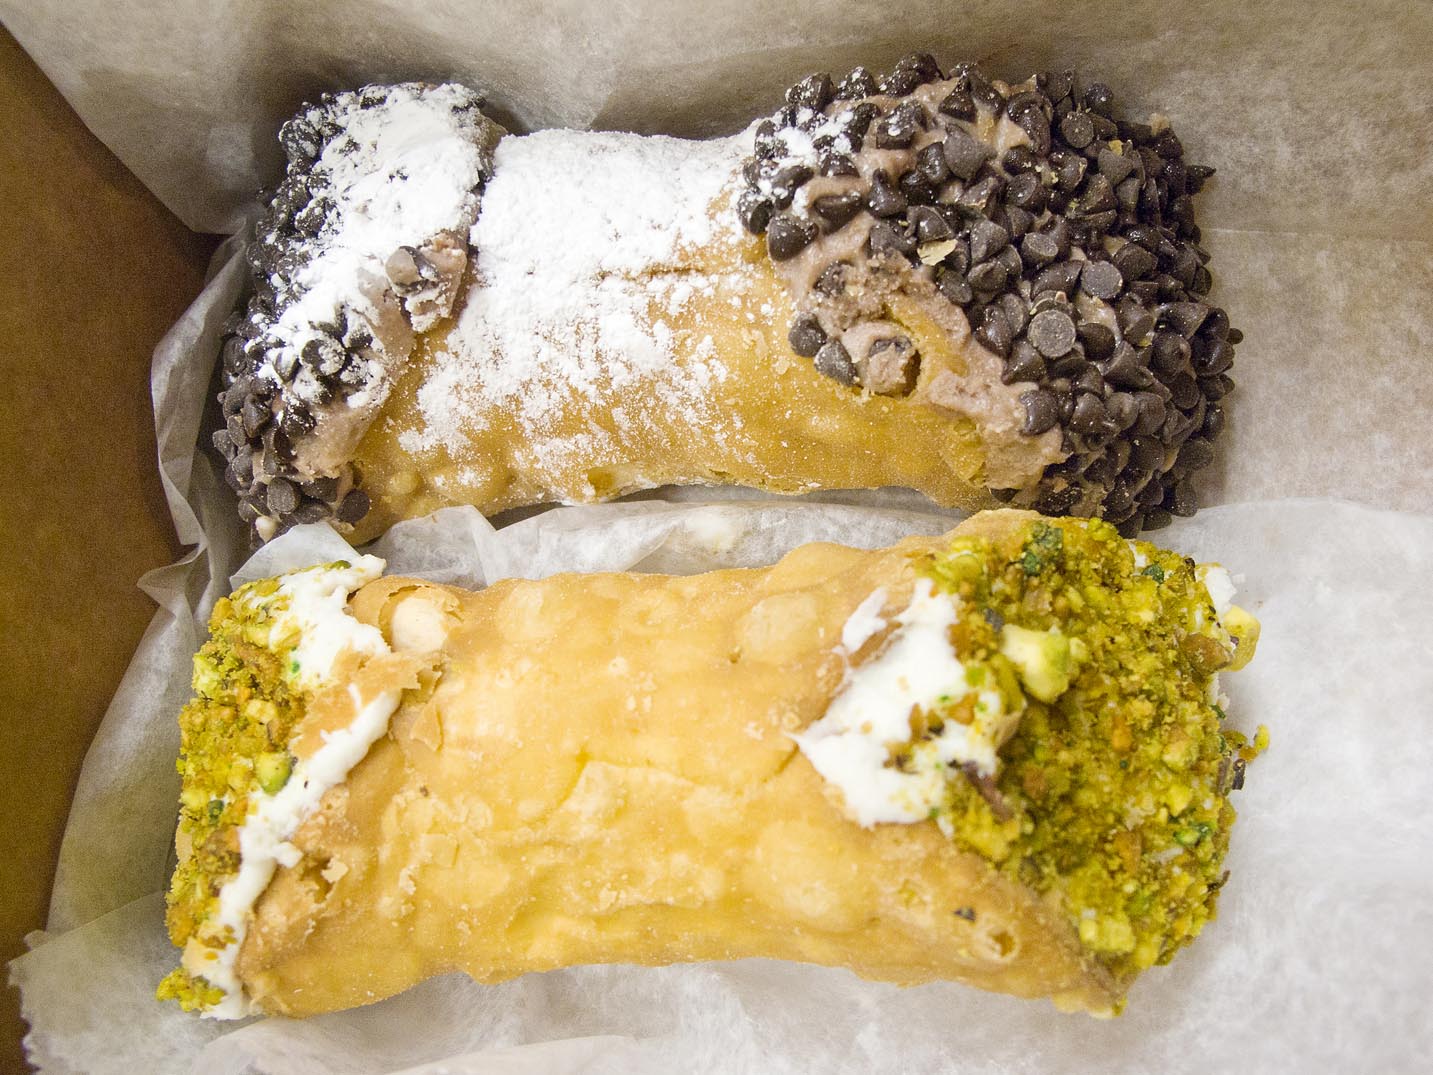 Cannolis from Mike's Pastry in Boston.